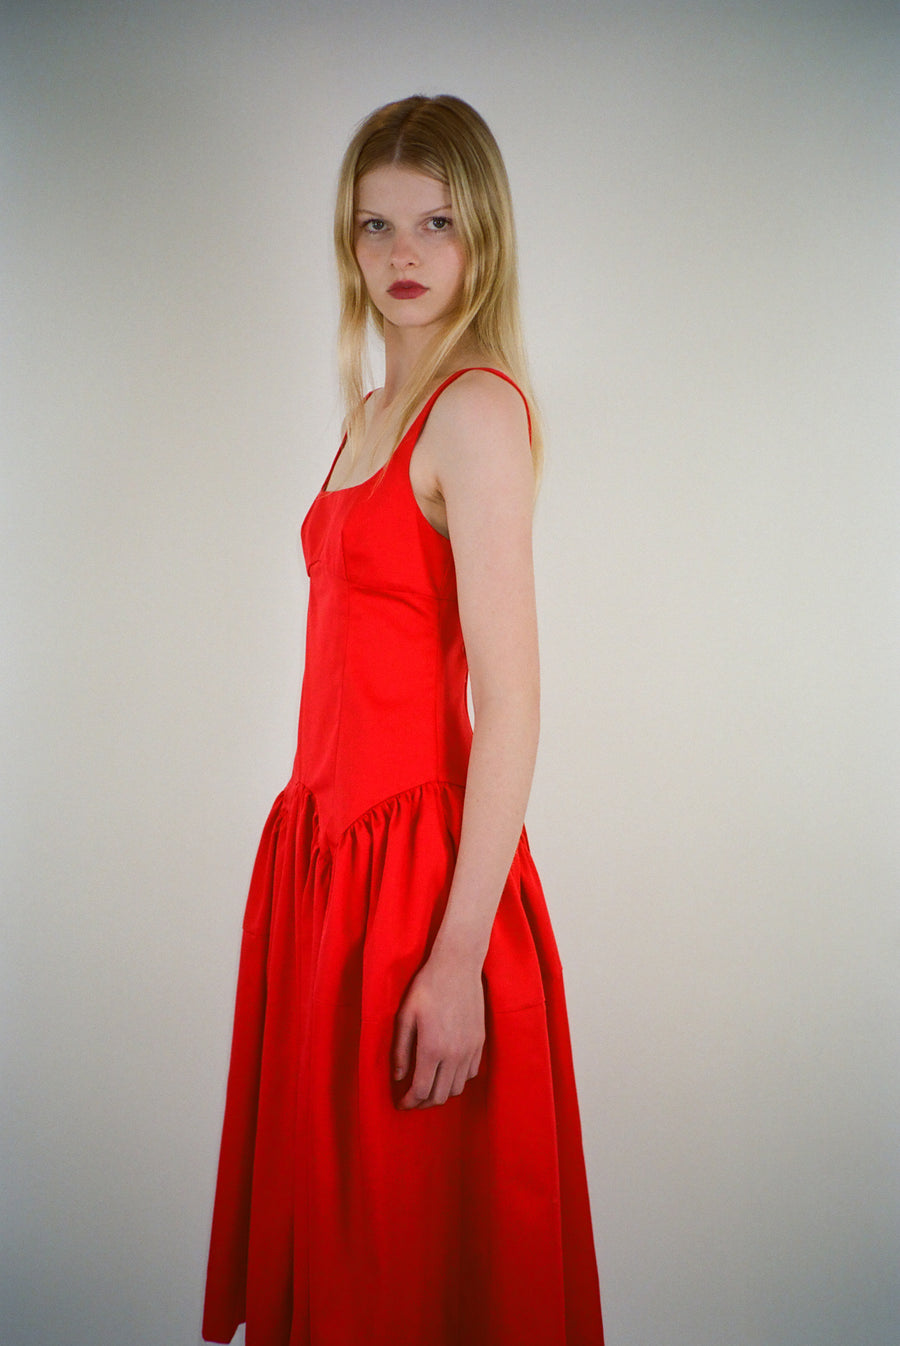 Sleeveless midi length dress in red with ties at back on model